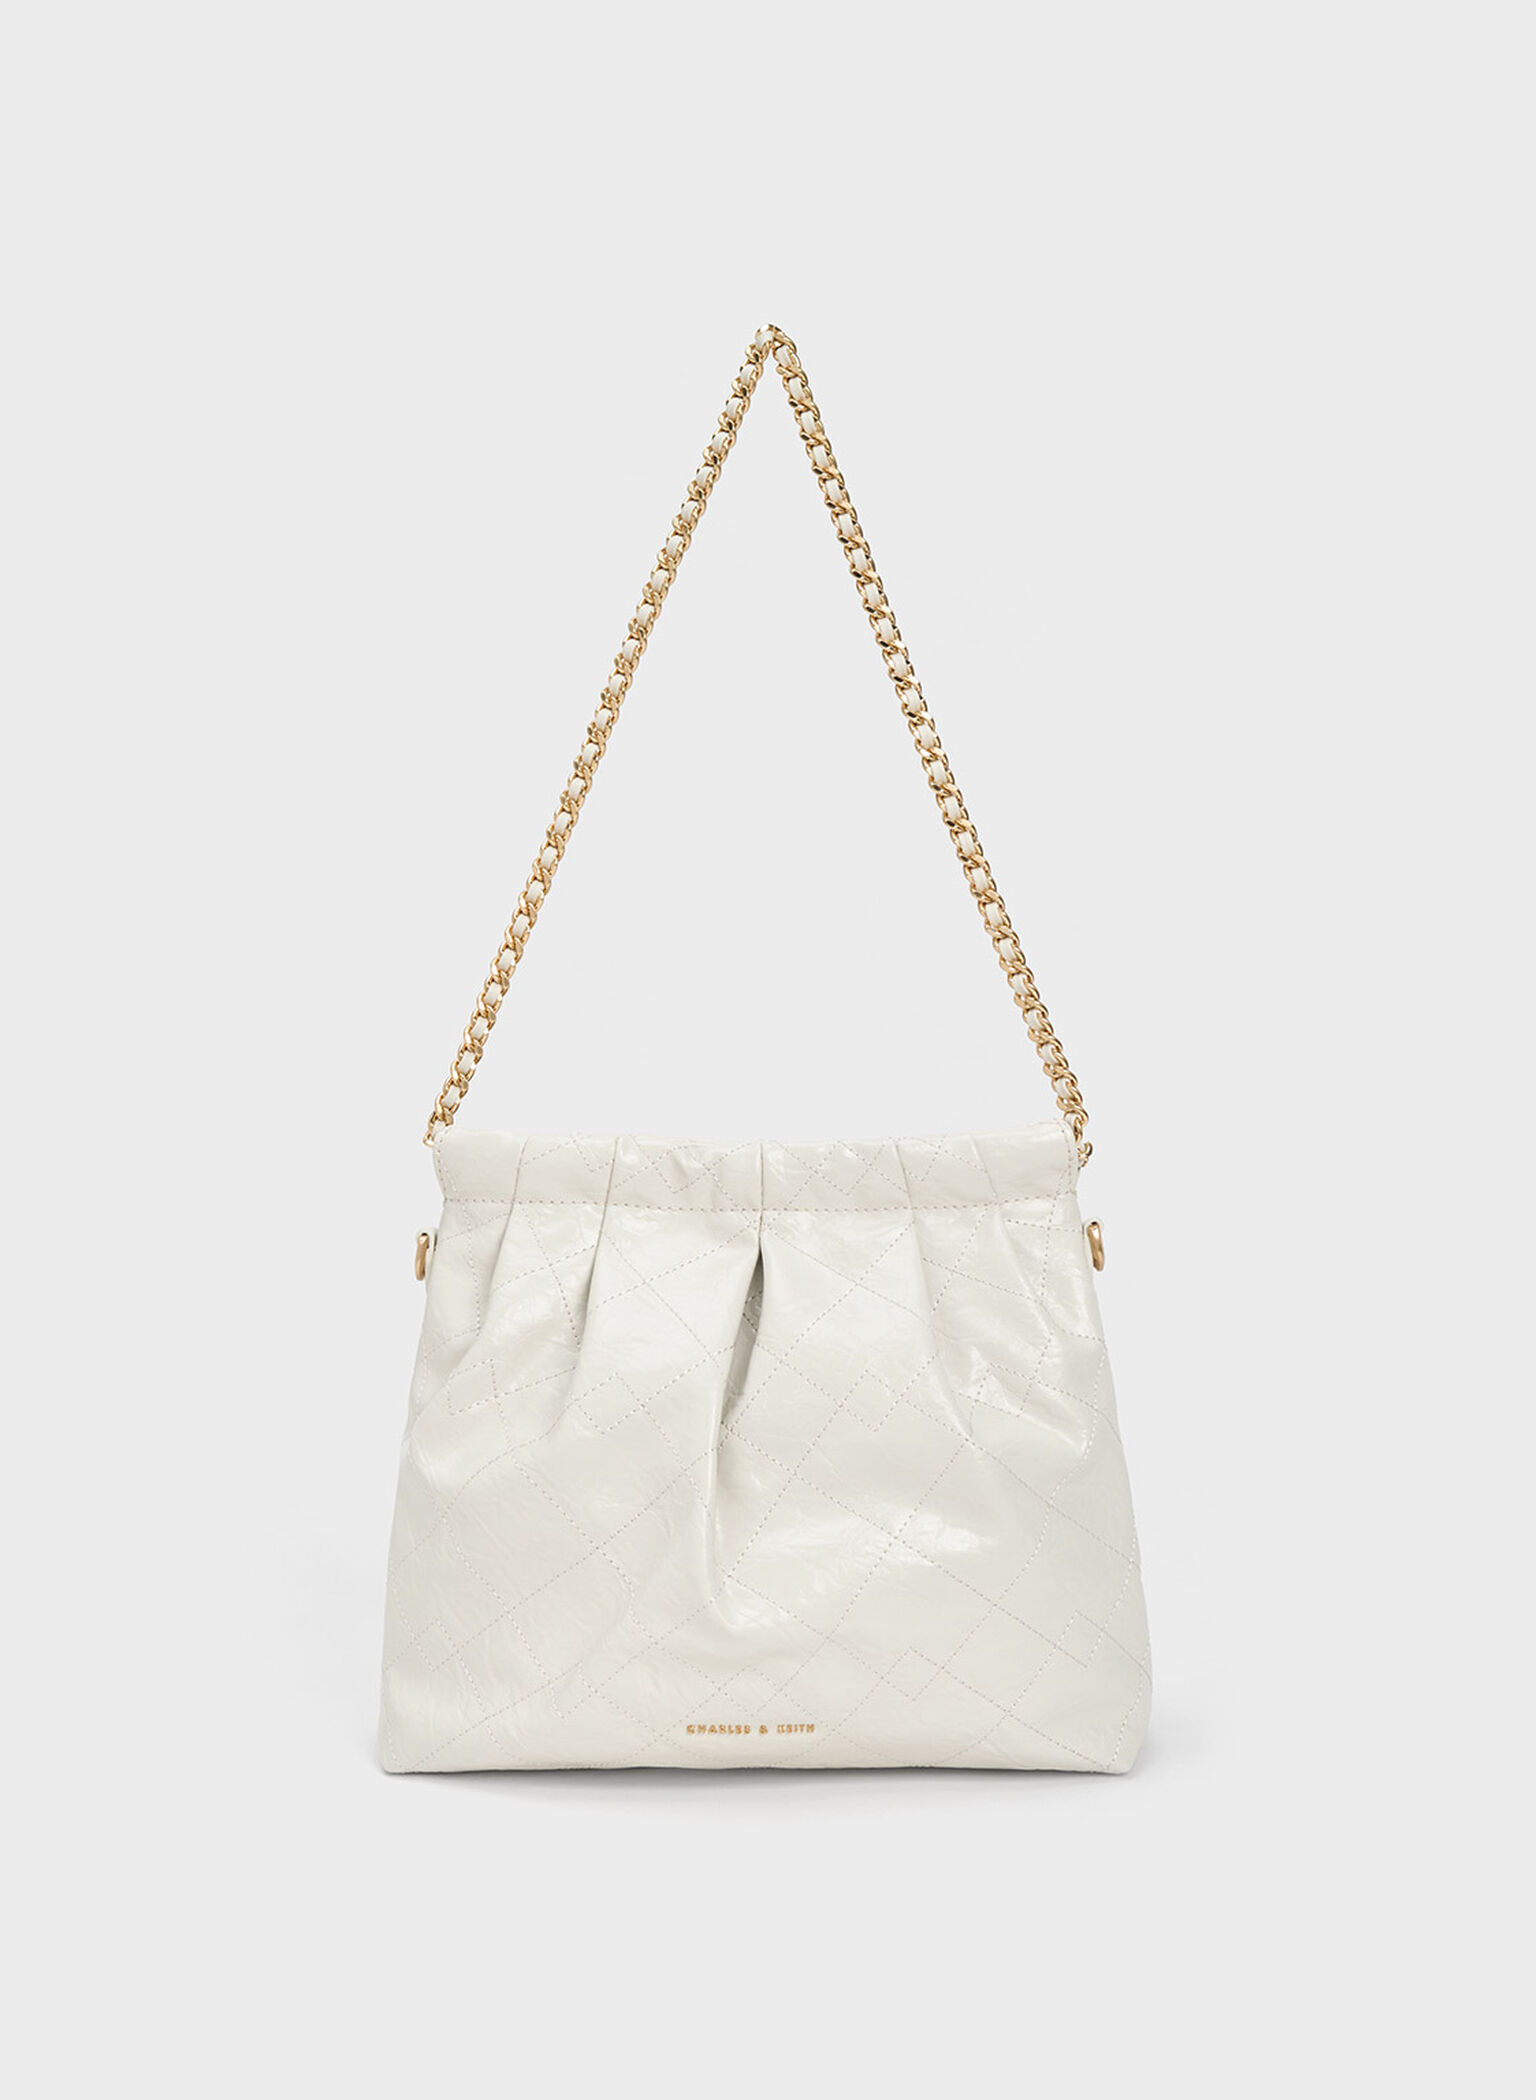 White Duo Chain Handle Shoulder Bag - CHARLES & KEITH US